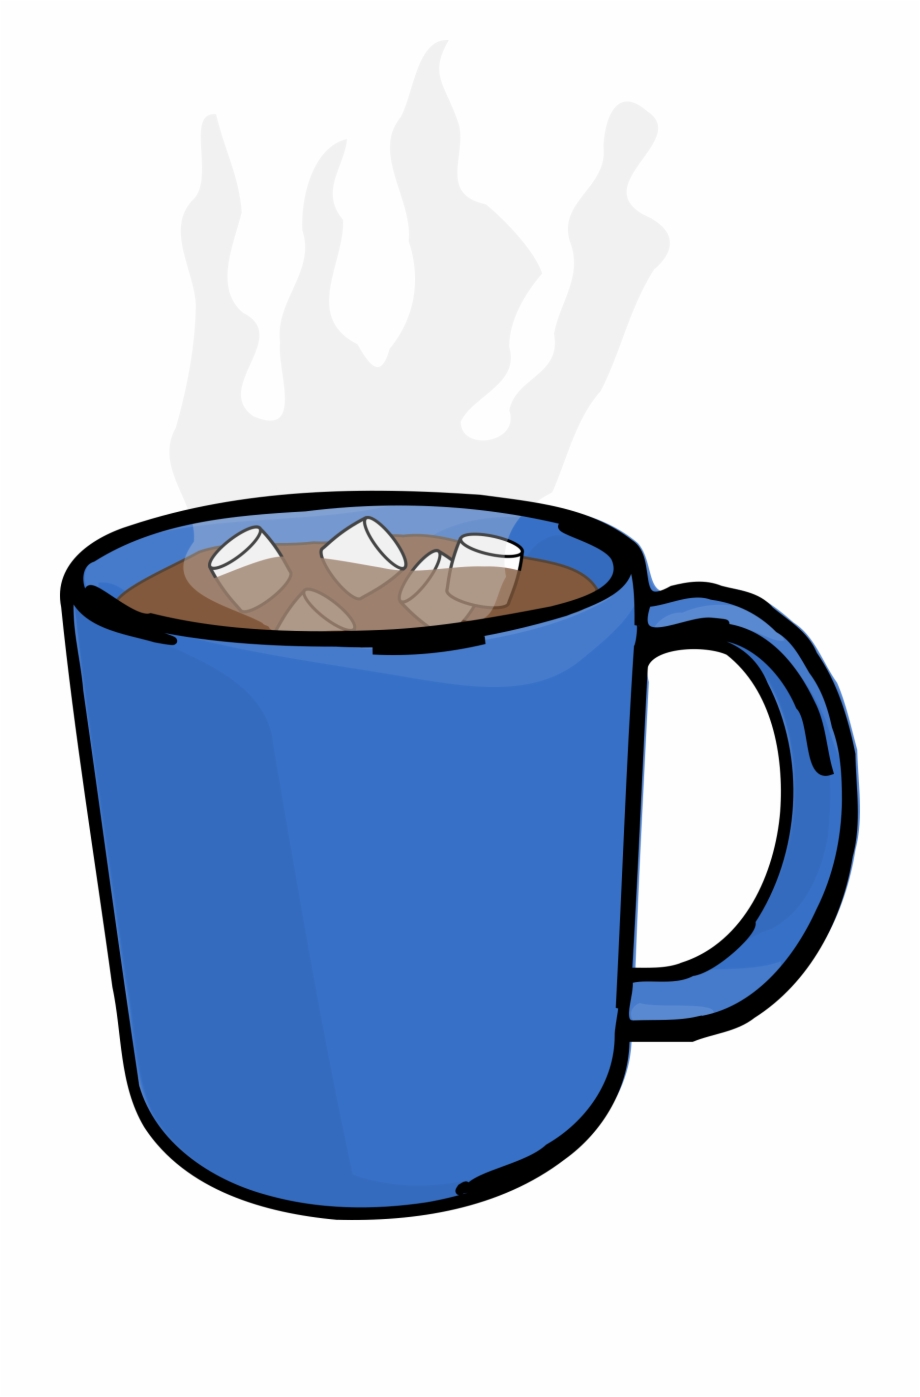 Picture #2575654 - cup clipart hot chocolate mug. cup clipart hot chocolate m...